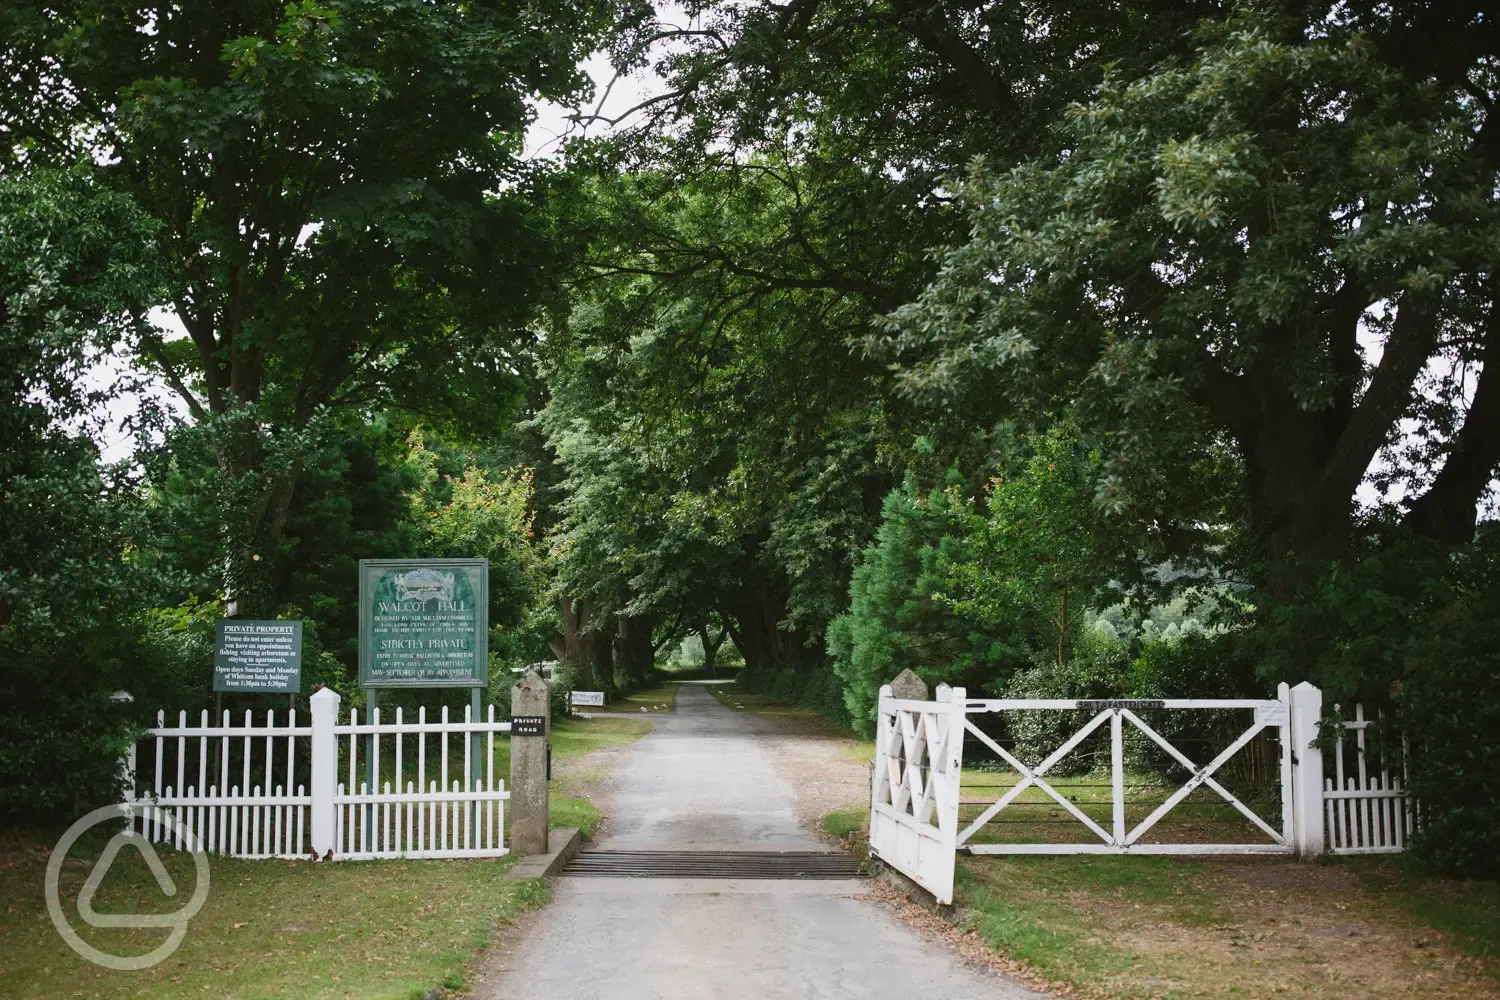 Entrance to the Walcot Estate